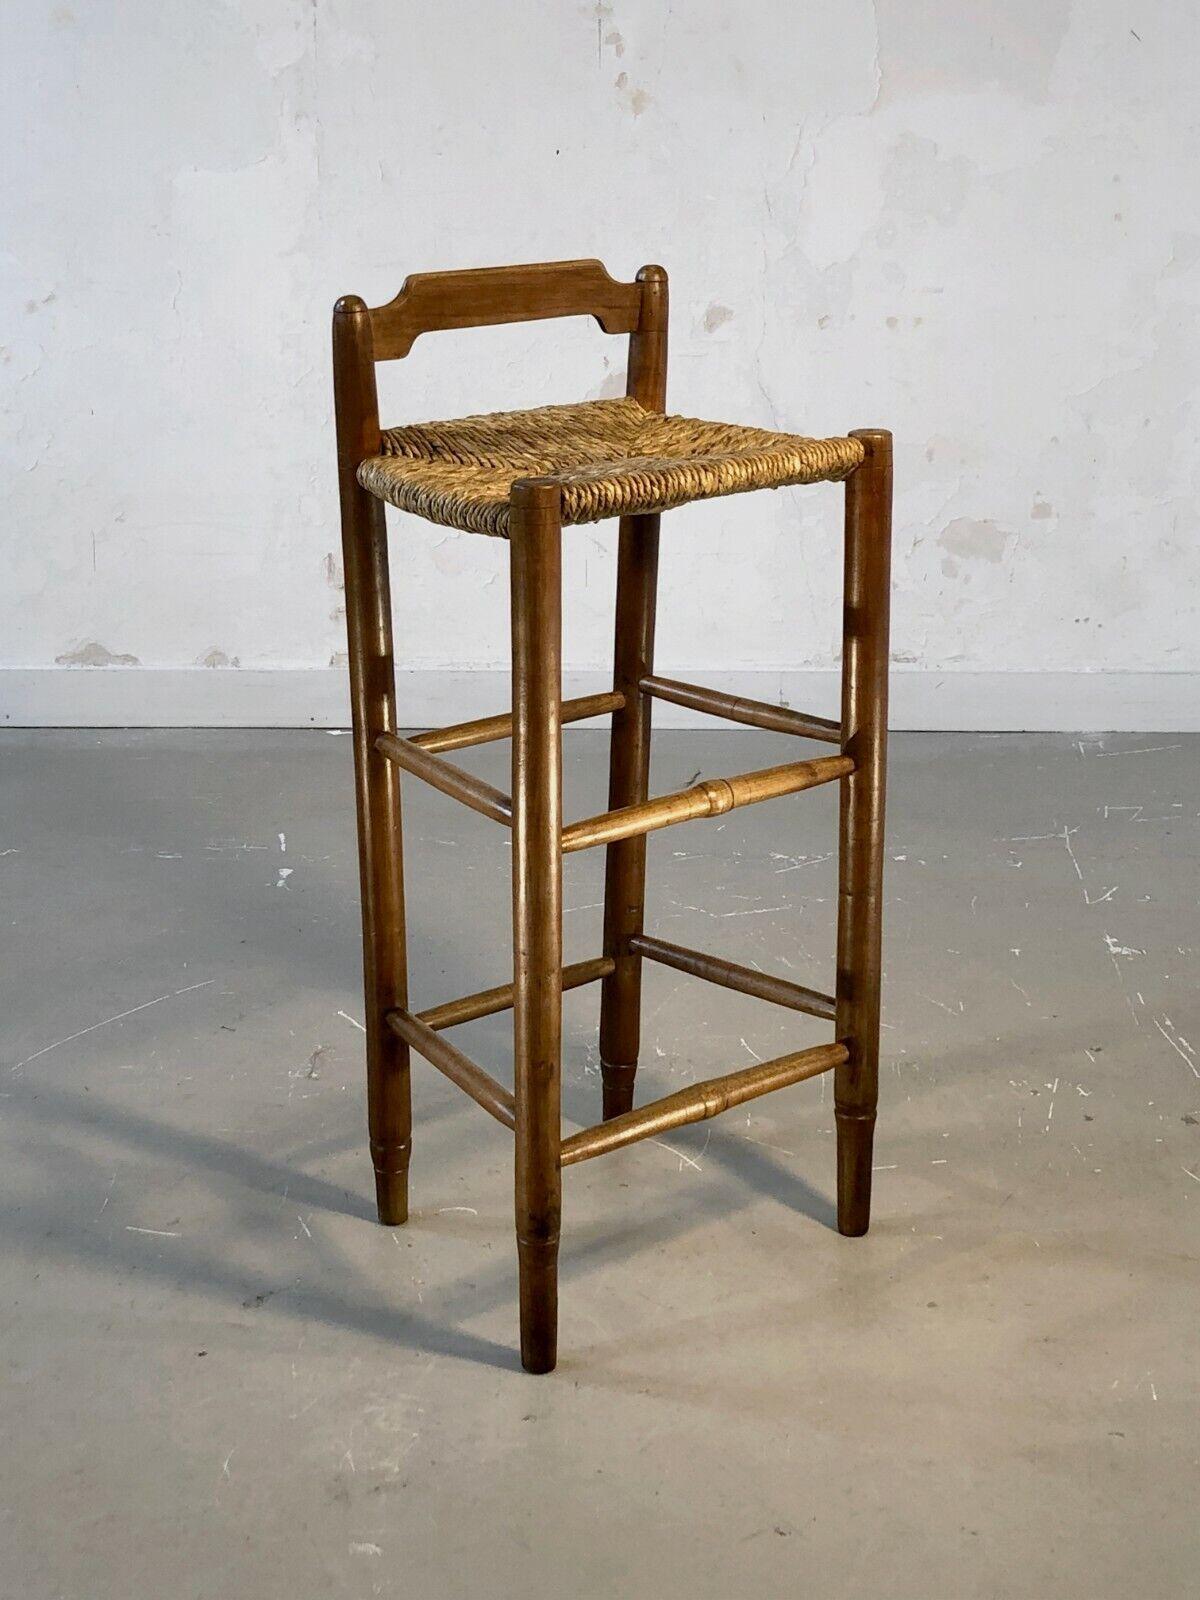 A BRUTALIST MID-CENTURY-MODERN RUSTIC BAR STOOL CHAIR, France 1950 For Sale 7